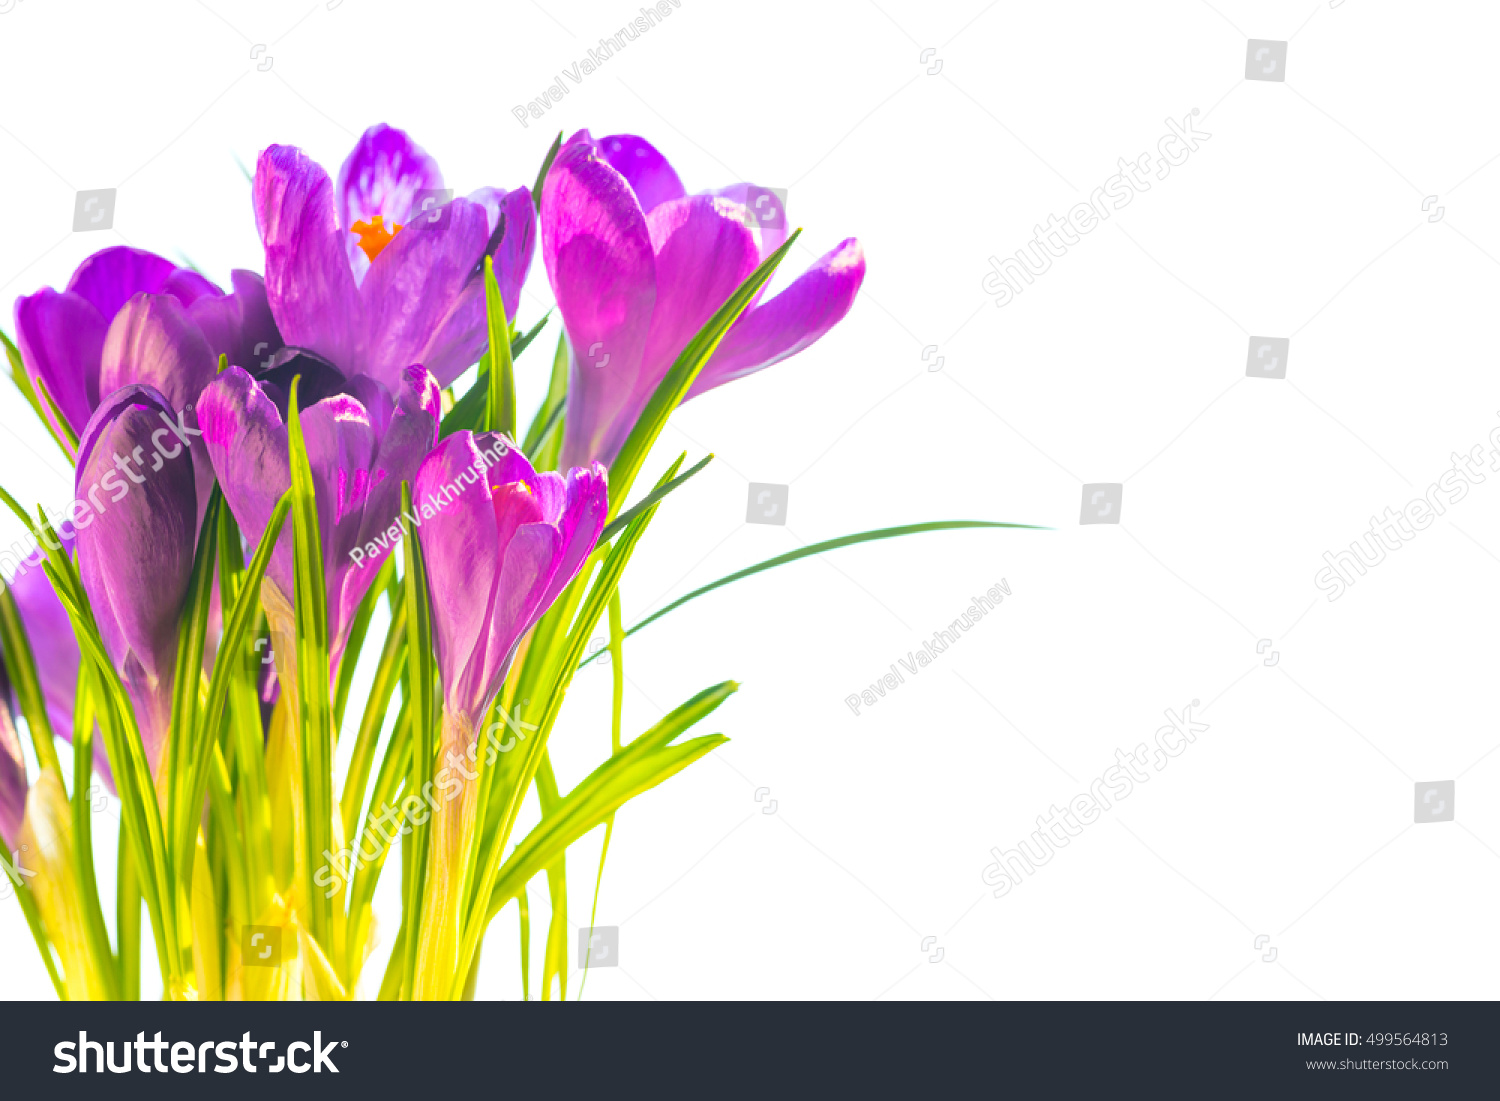 First spring flowers - bouquet of purple crocuses isolated on white background with copyspace #499564813